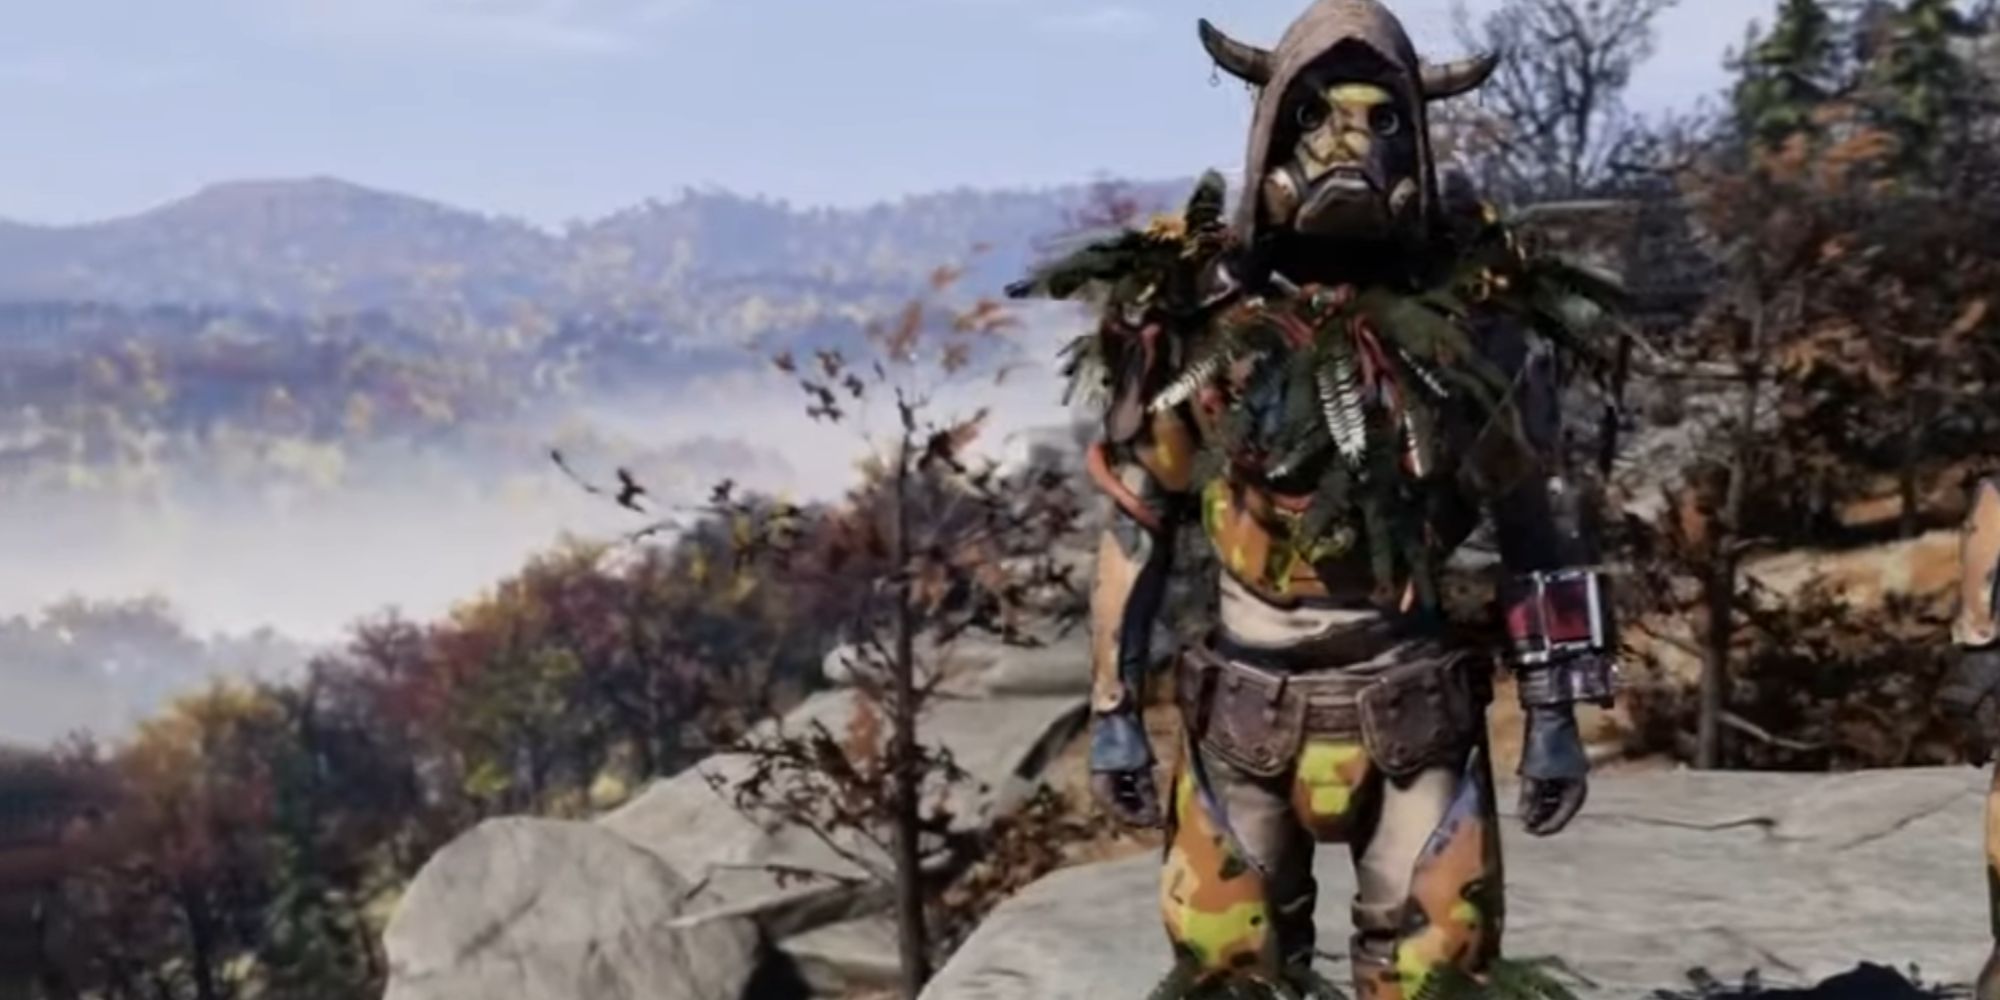 Fallout 76 Character Wearing The Thorn Armor